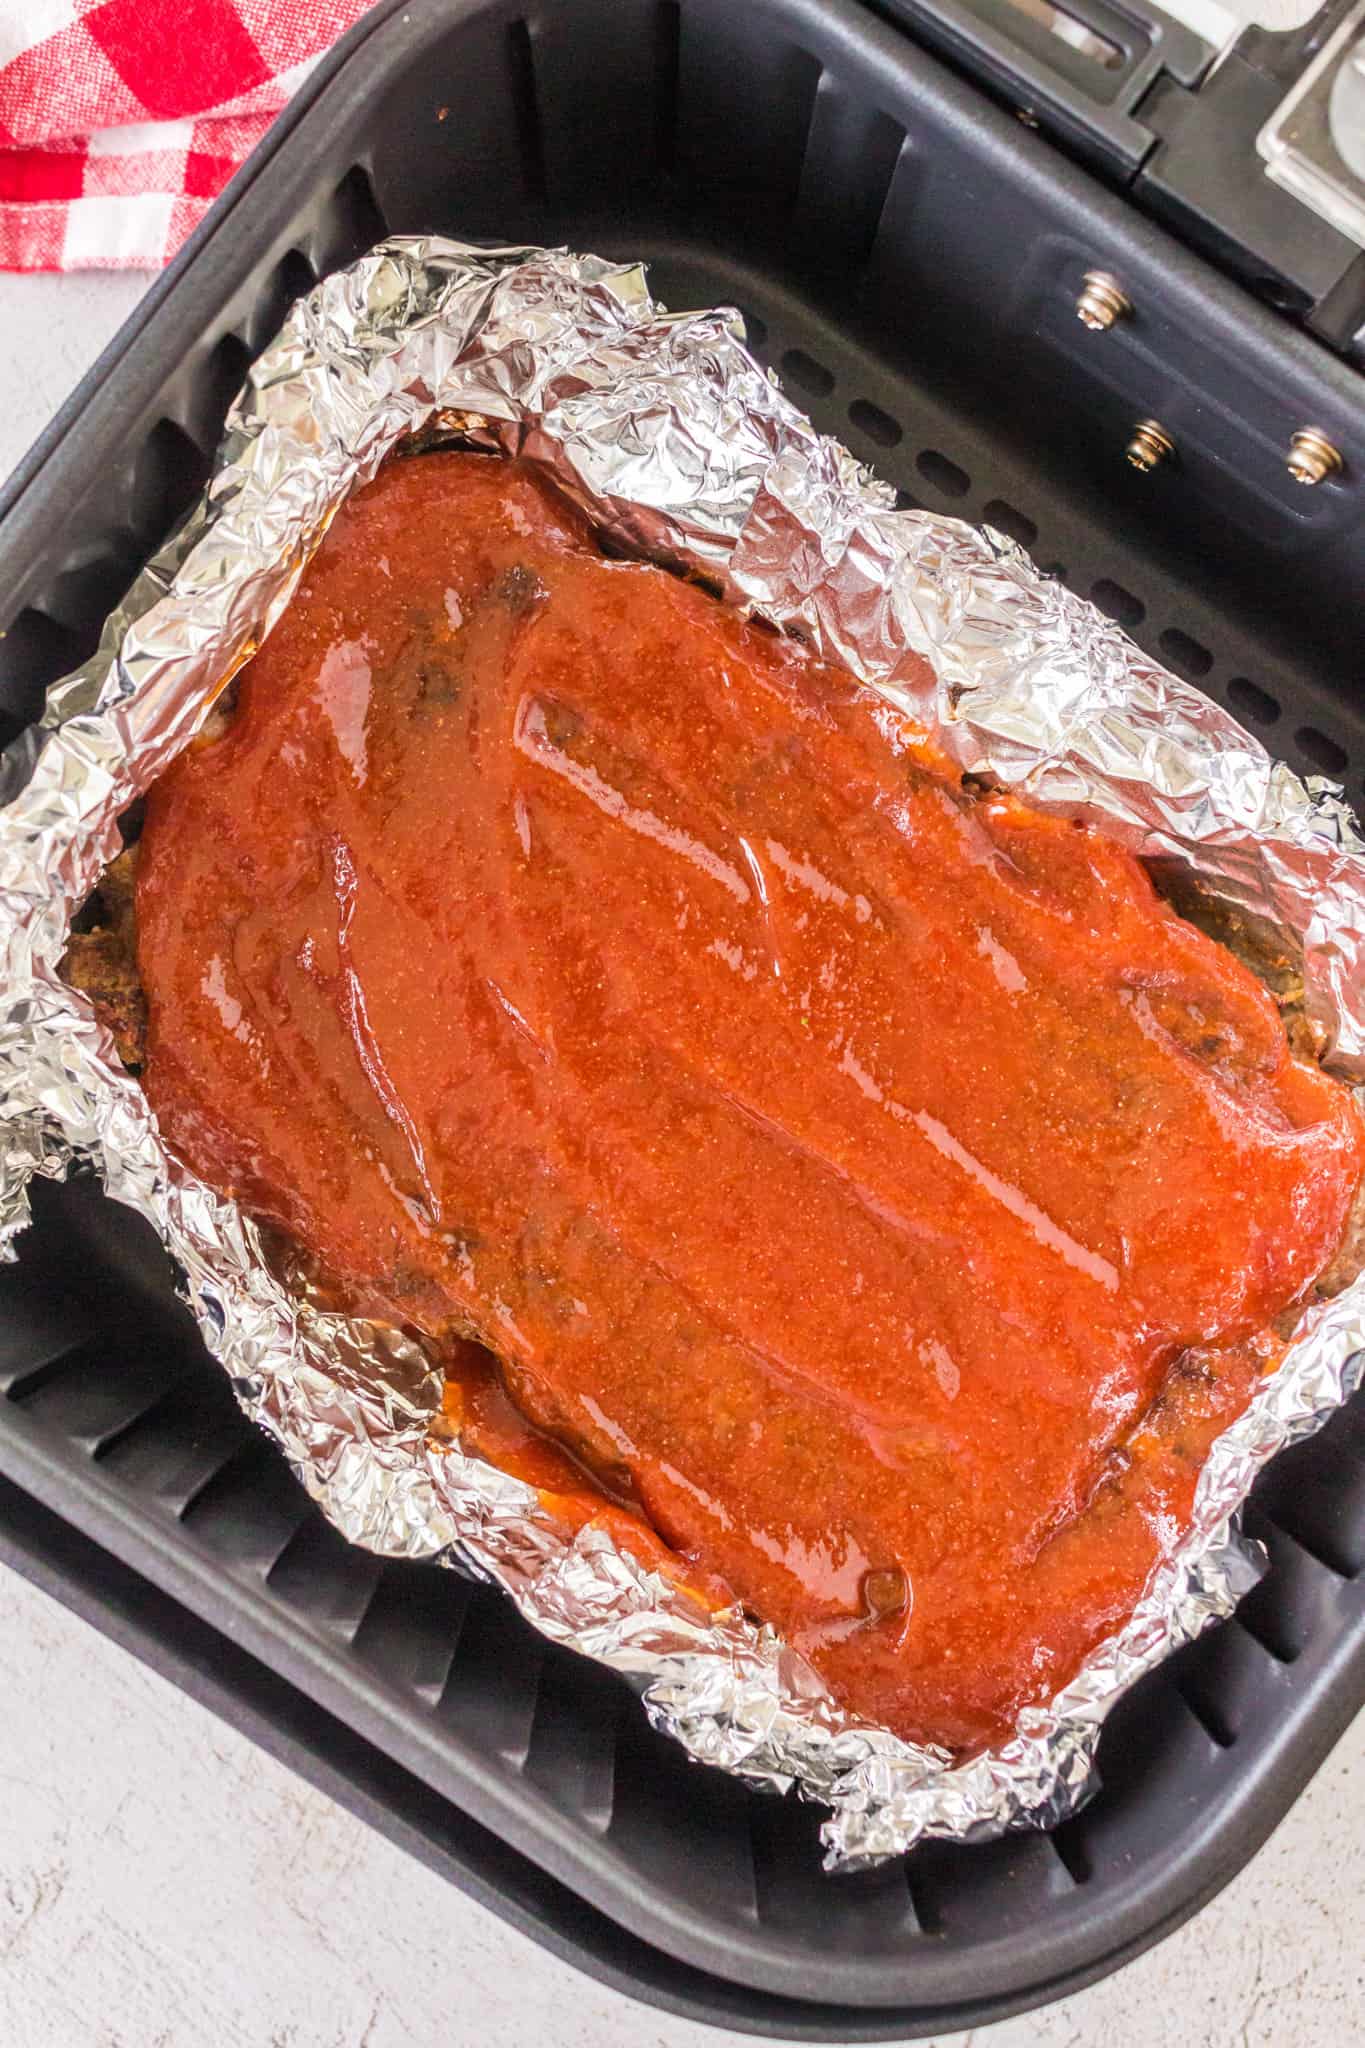 Air Fryer Meatloaf is a simple ground beef meatloaf recipe made with Italian seasoned bread crumbs and topped with a brown sugar ketchup glaze.